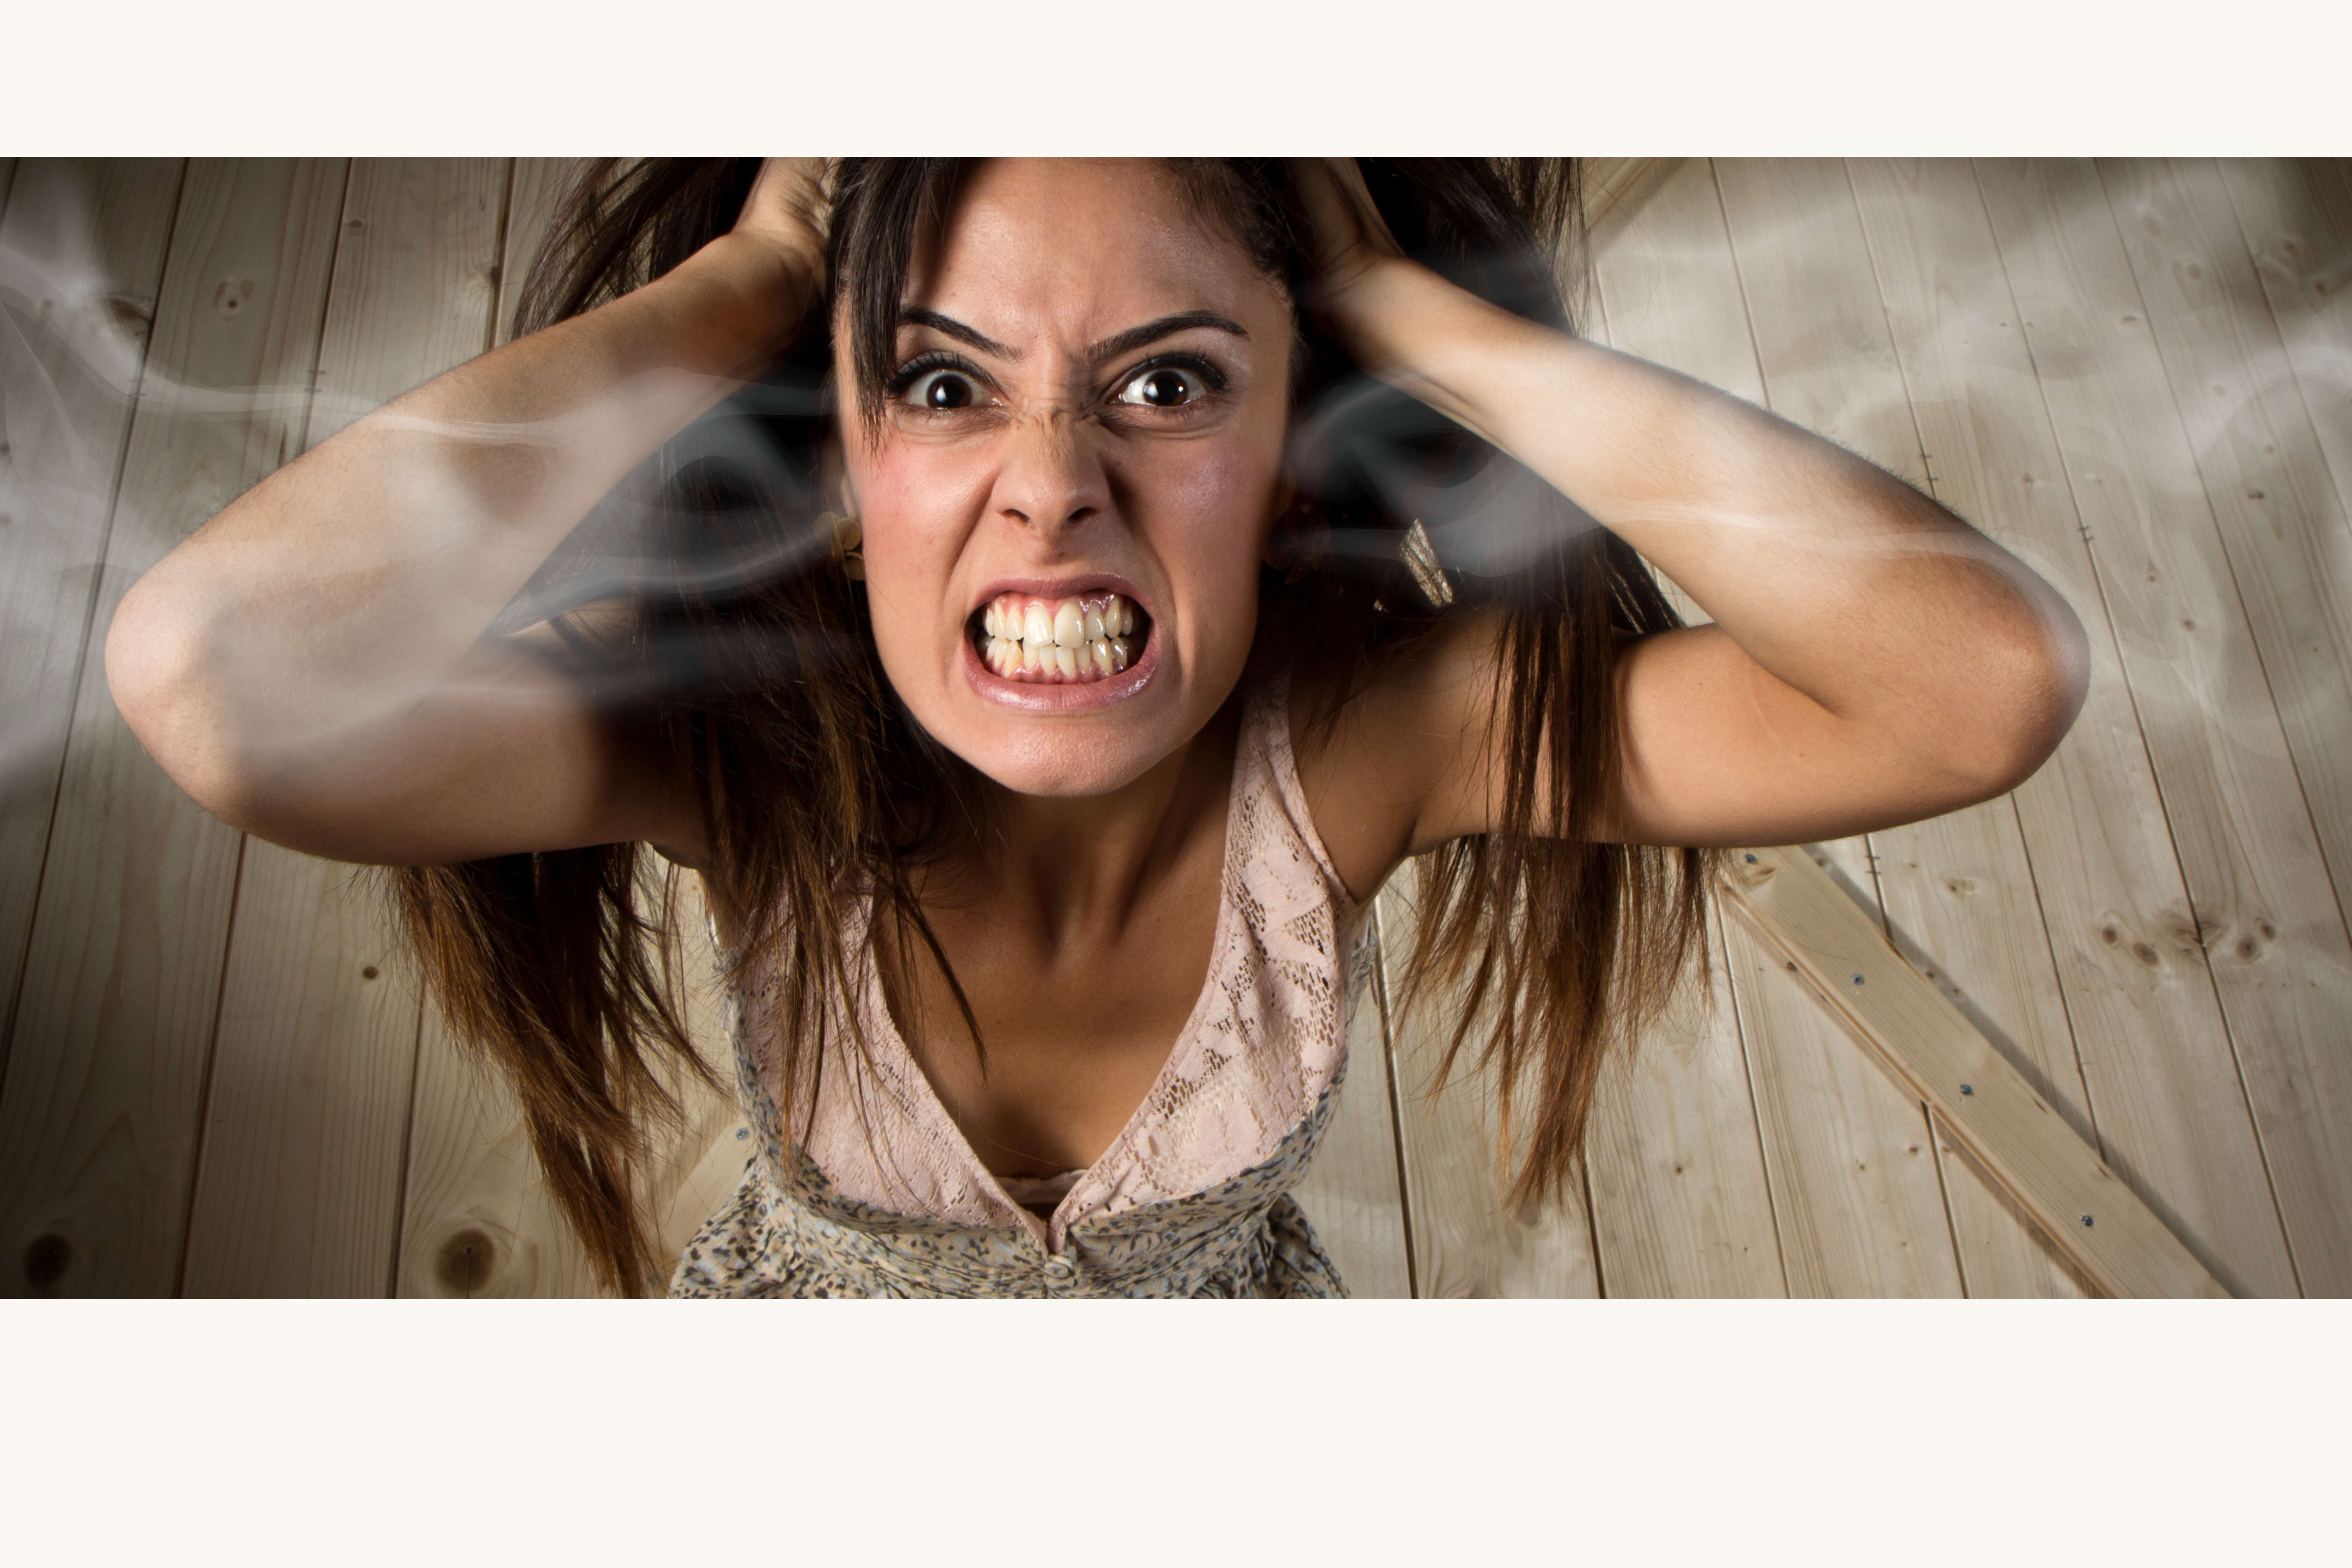 woman with rage and anger